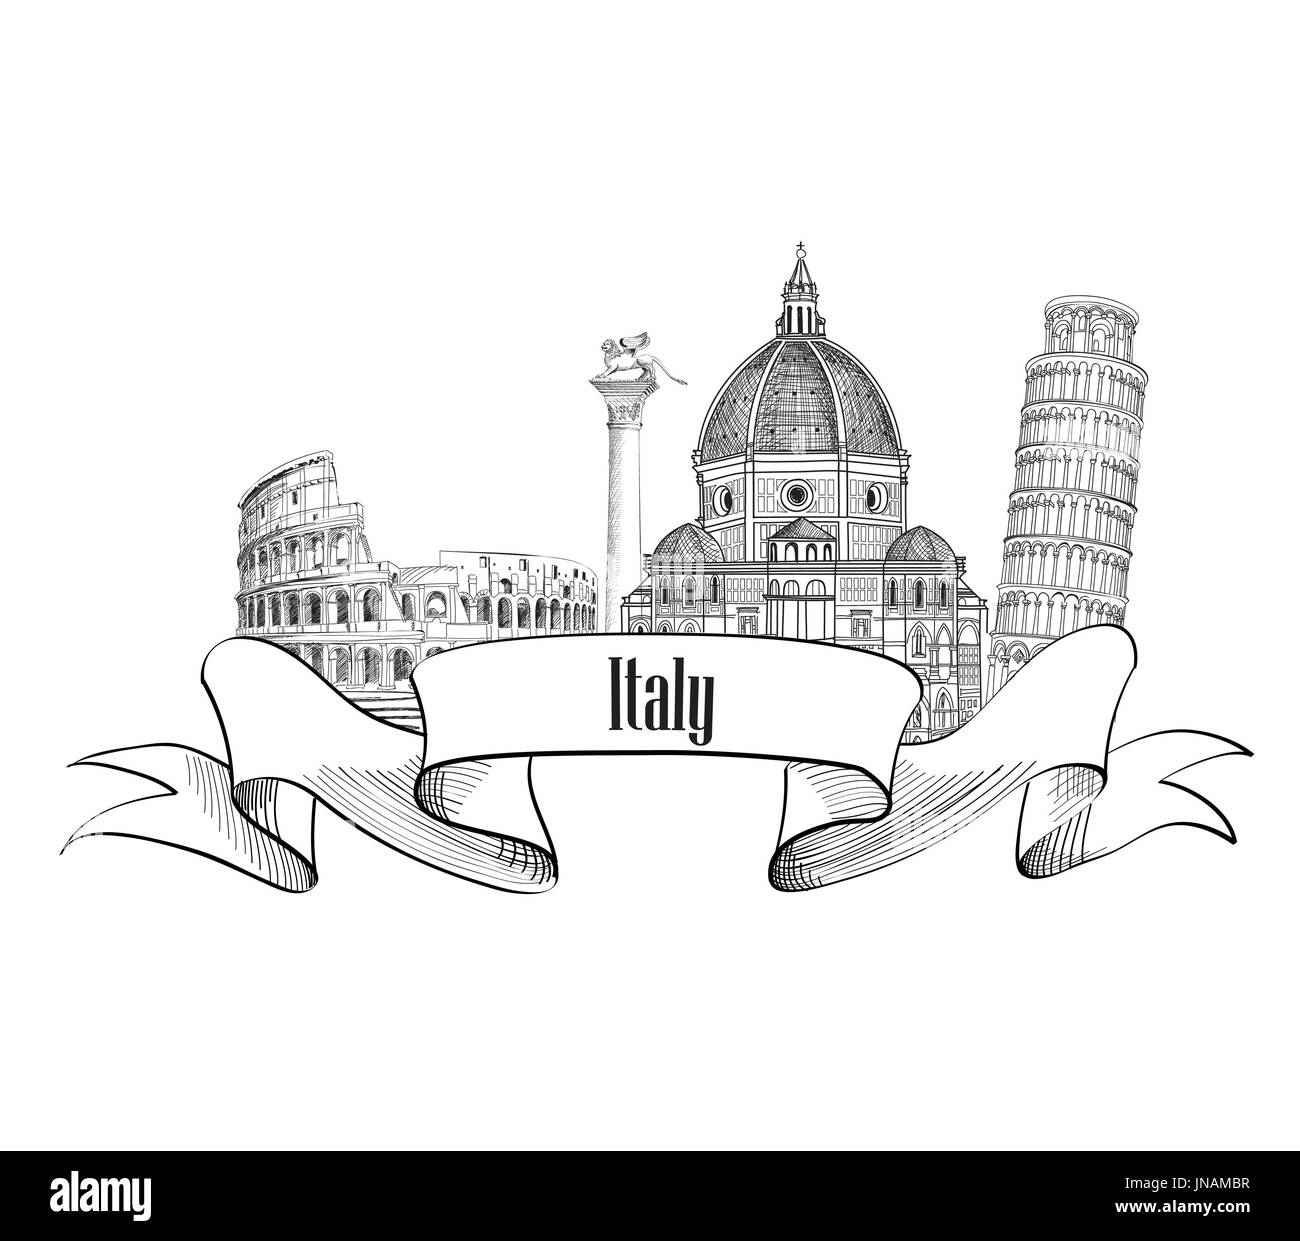 Italy architectural sign. Travel Italy label. Italian famous cities skyline. Stock Photo